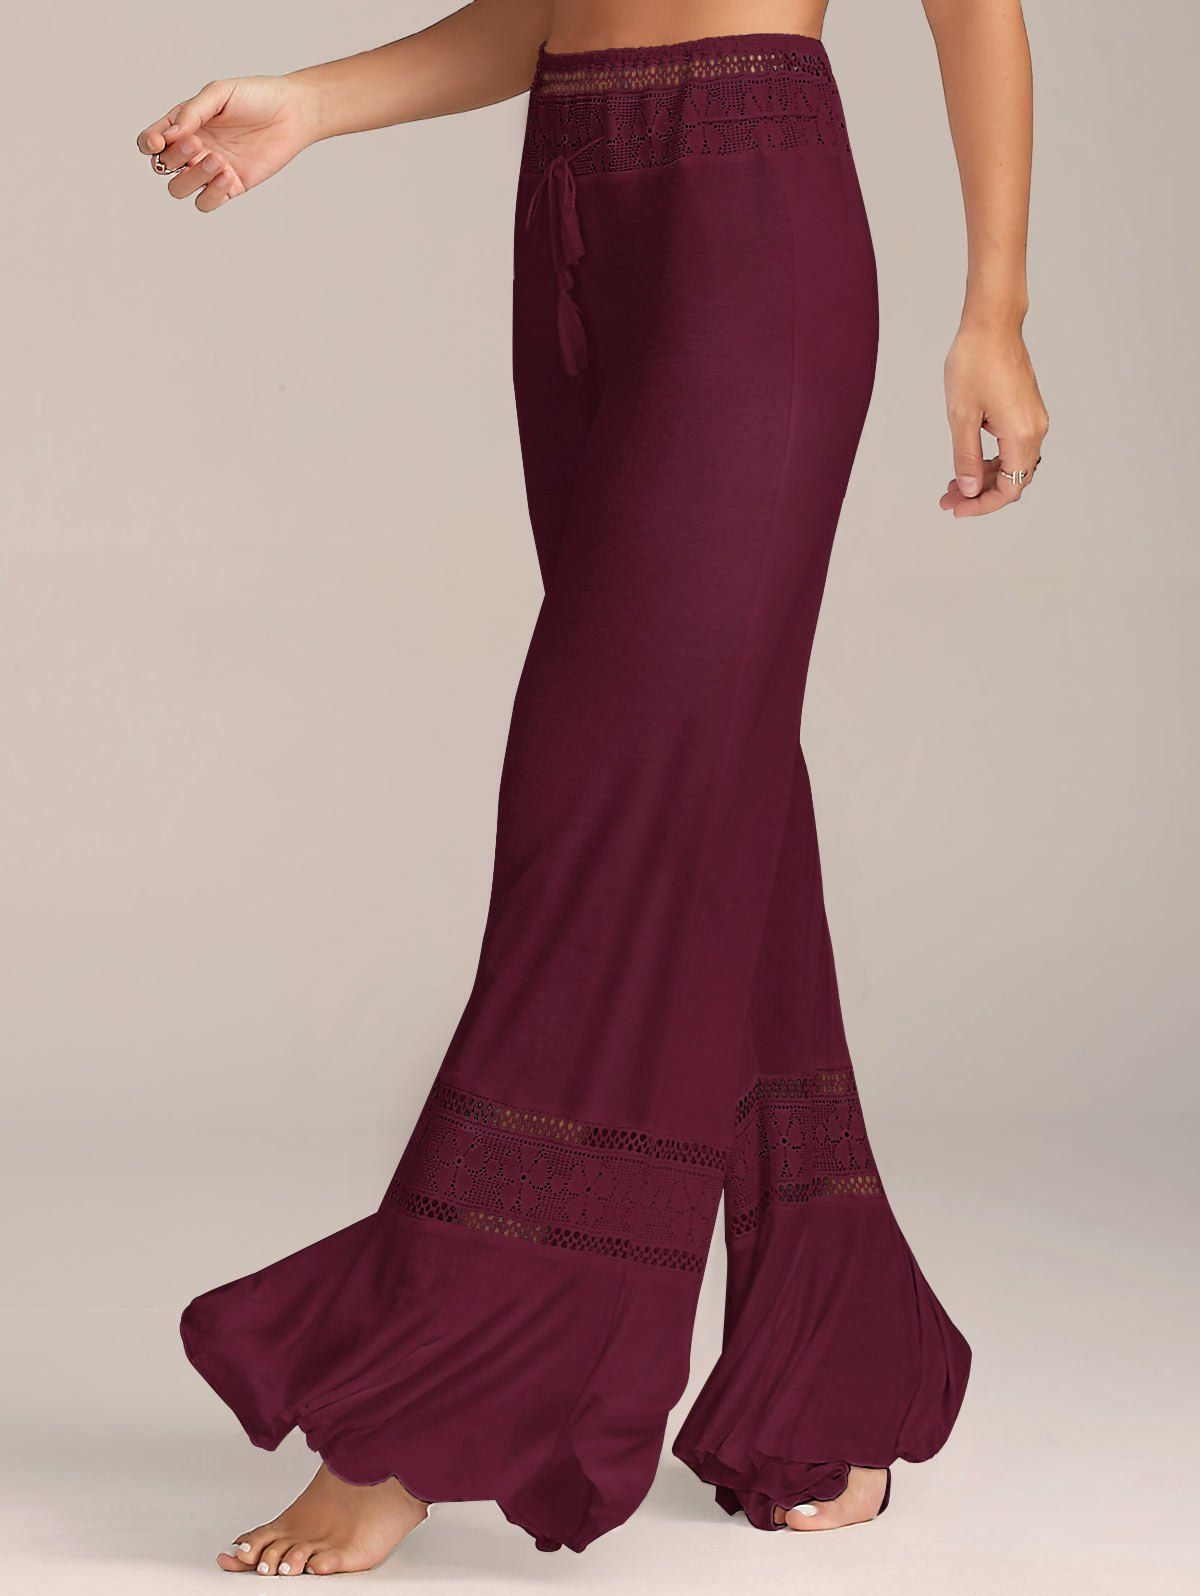 [41% OFF] 2021 High Waisted Lace Panel Palazzo Pants In WINE RED ...